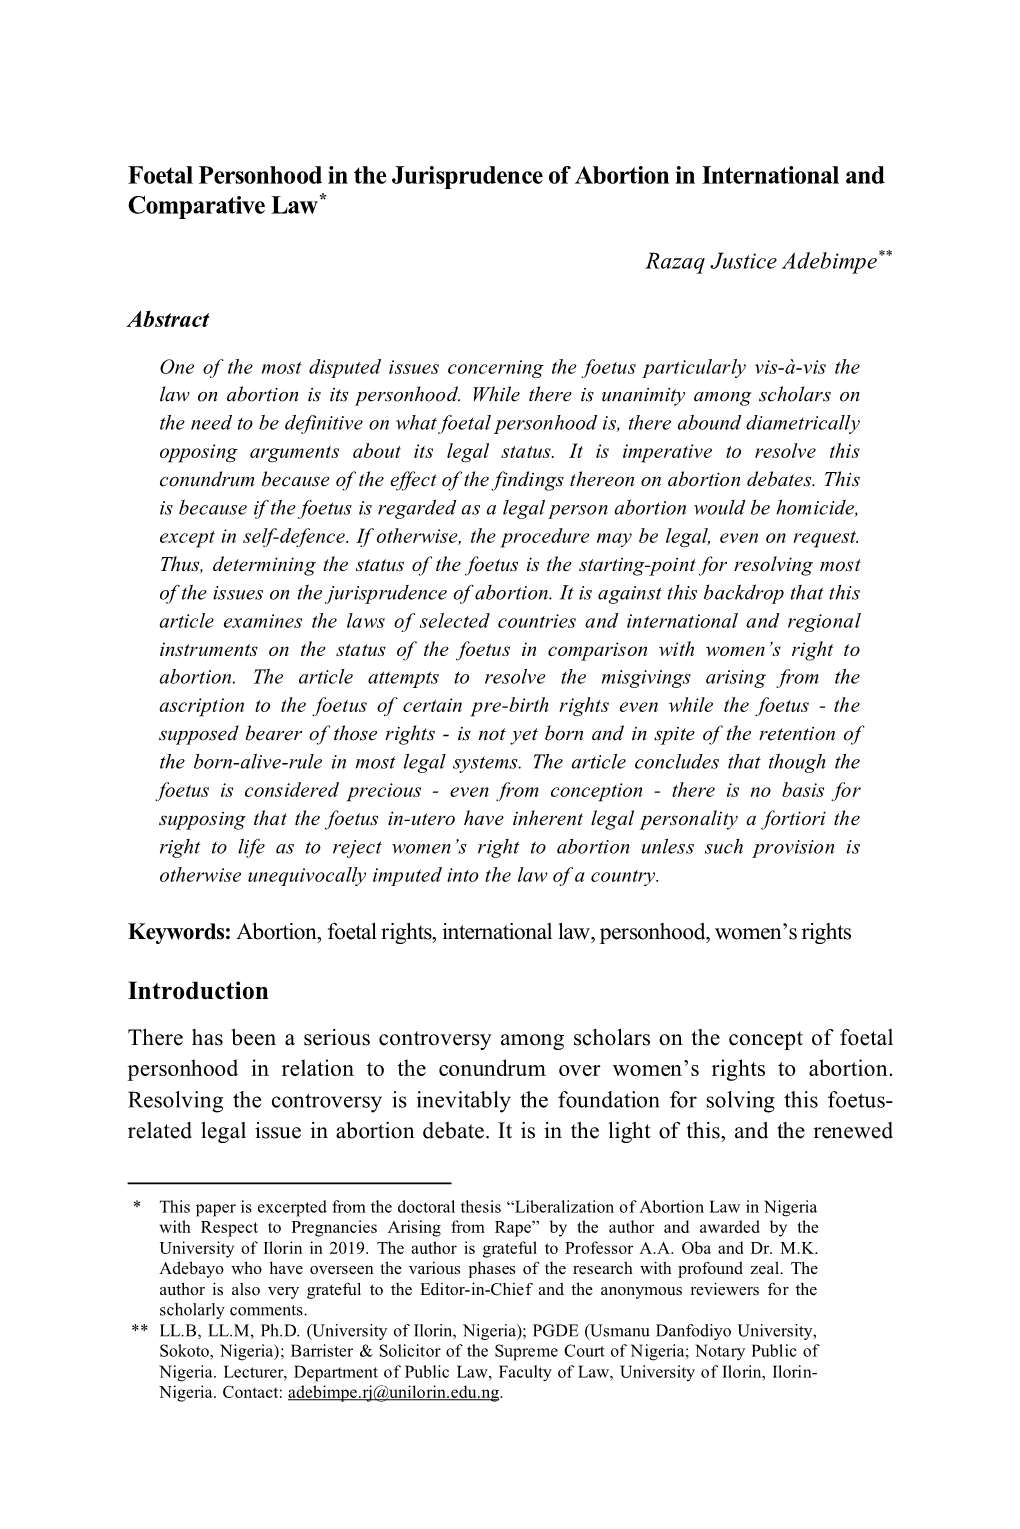 Foetal Personhood in the Jurisprudence of Abortion in International and Comparative Law*